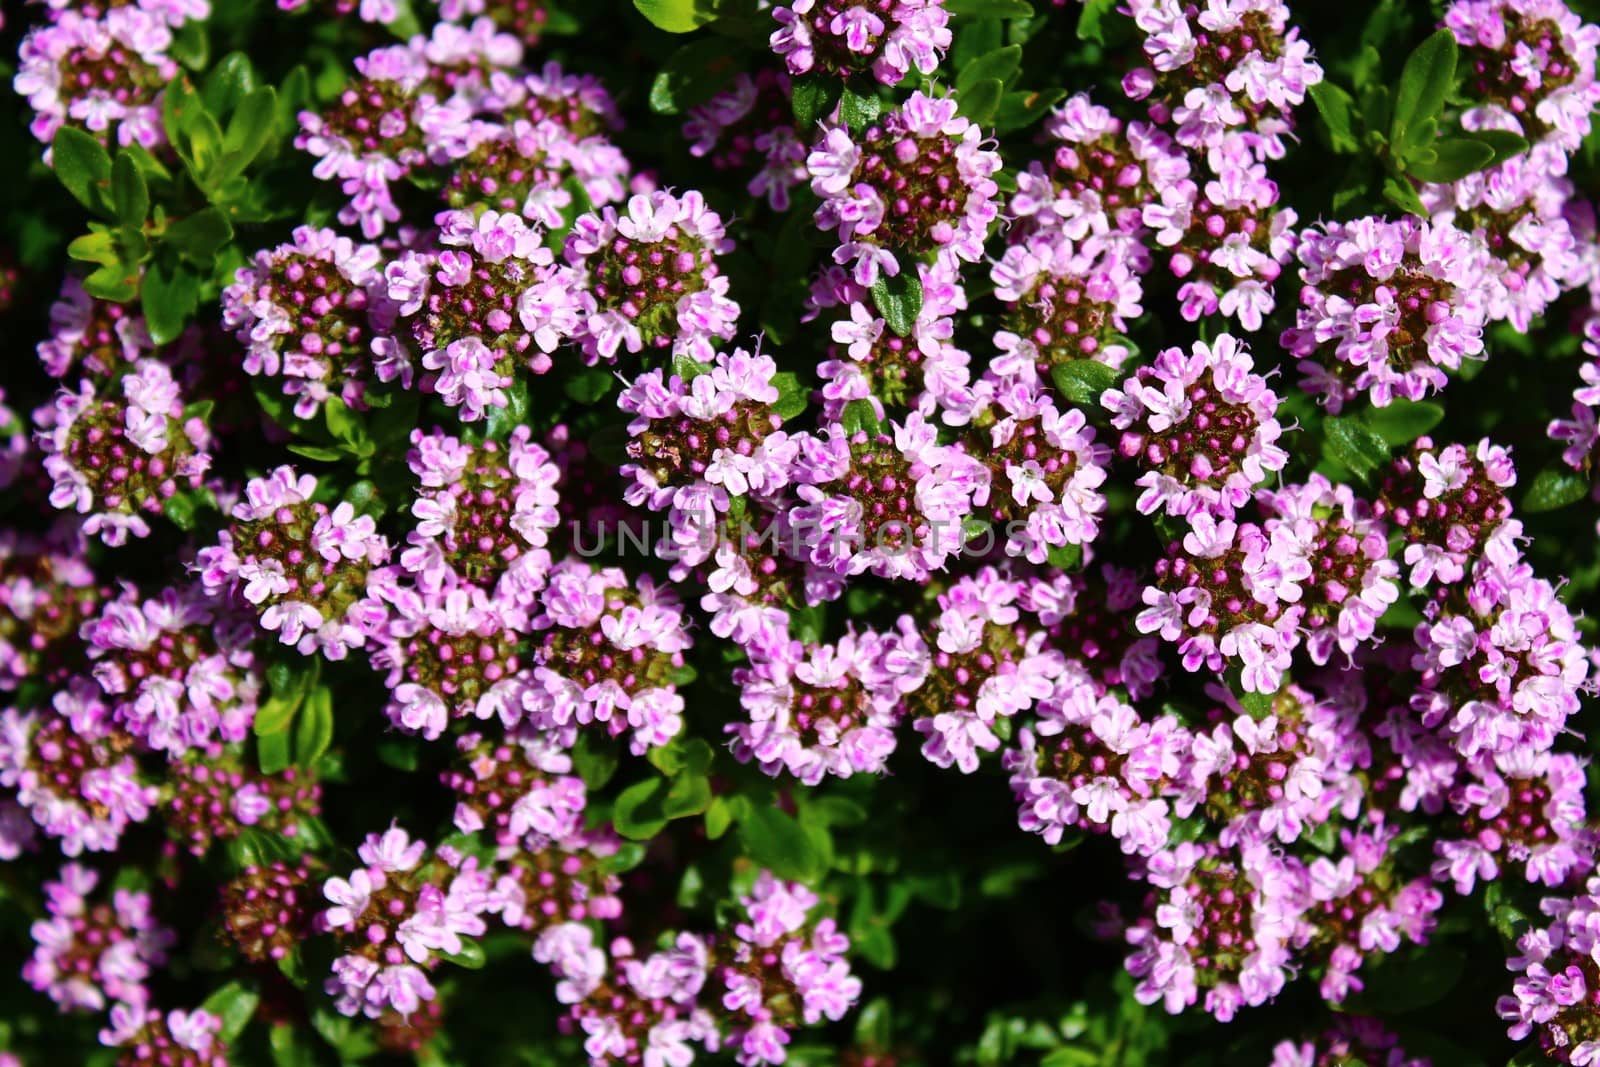 The picture shows blossoming thyme in the garden